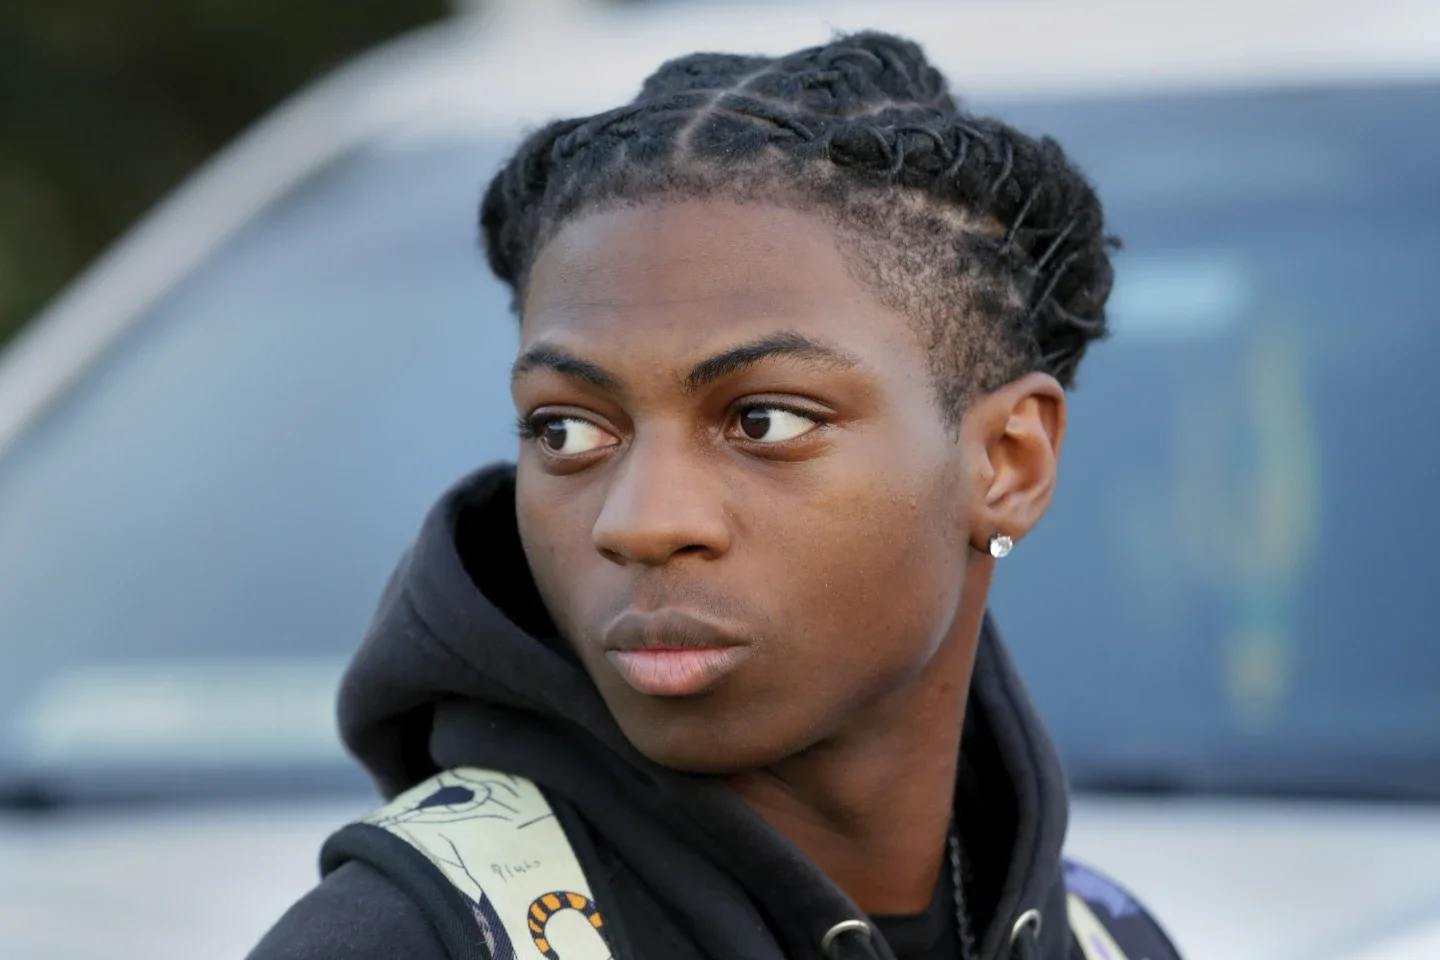 Black Texas Teen Suspended Over His Locs Removed From School And Sent To Disciplinary Program